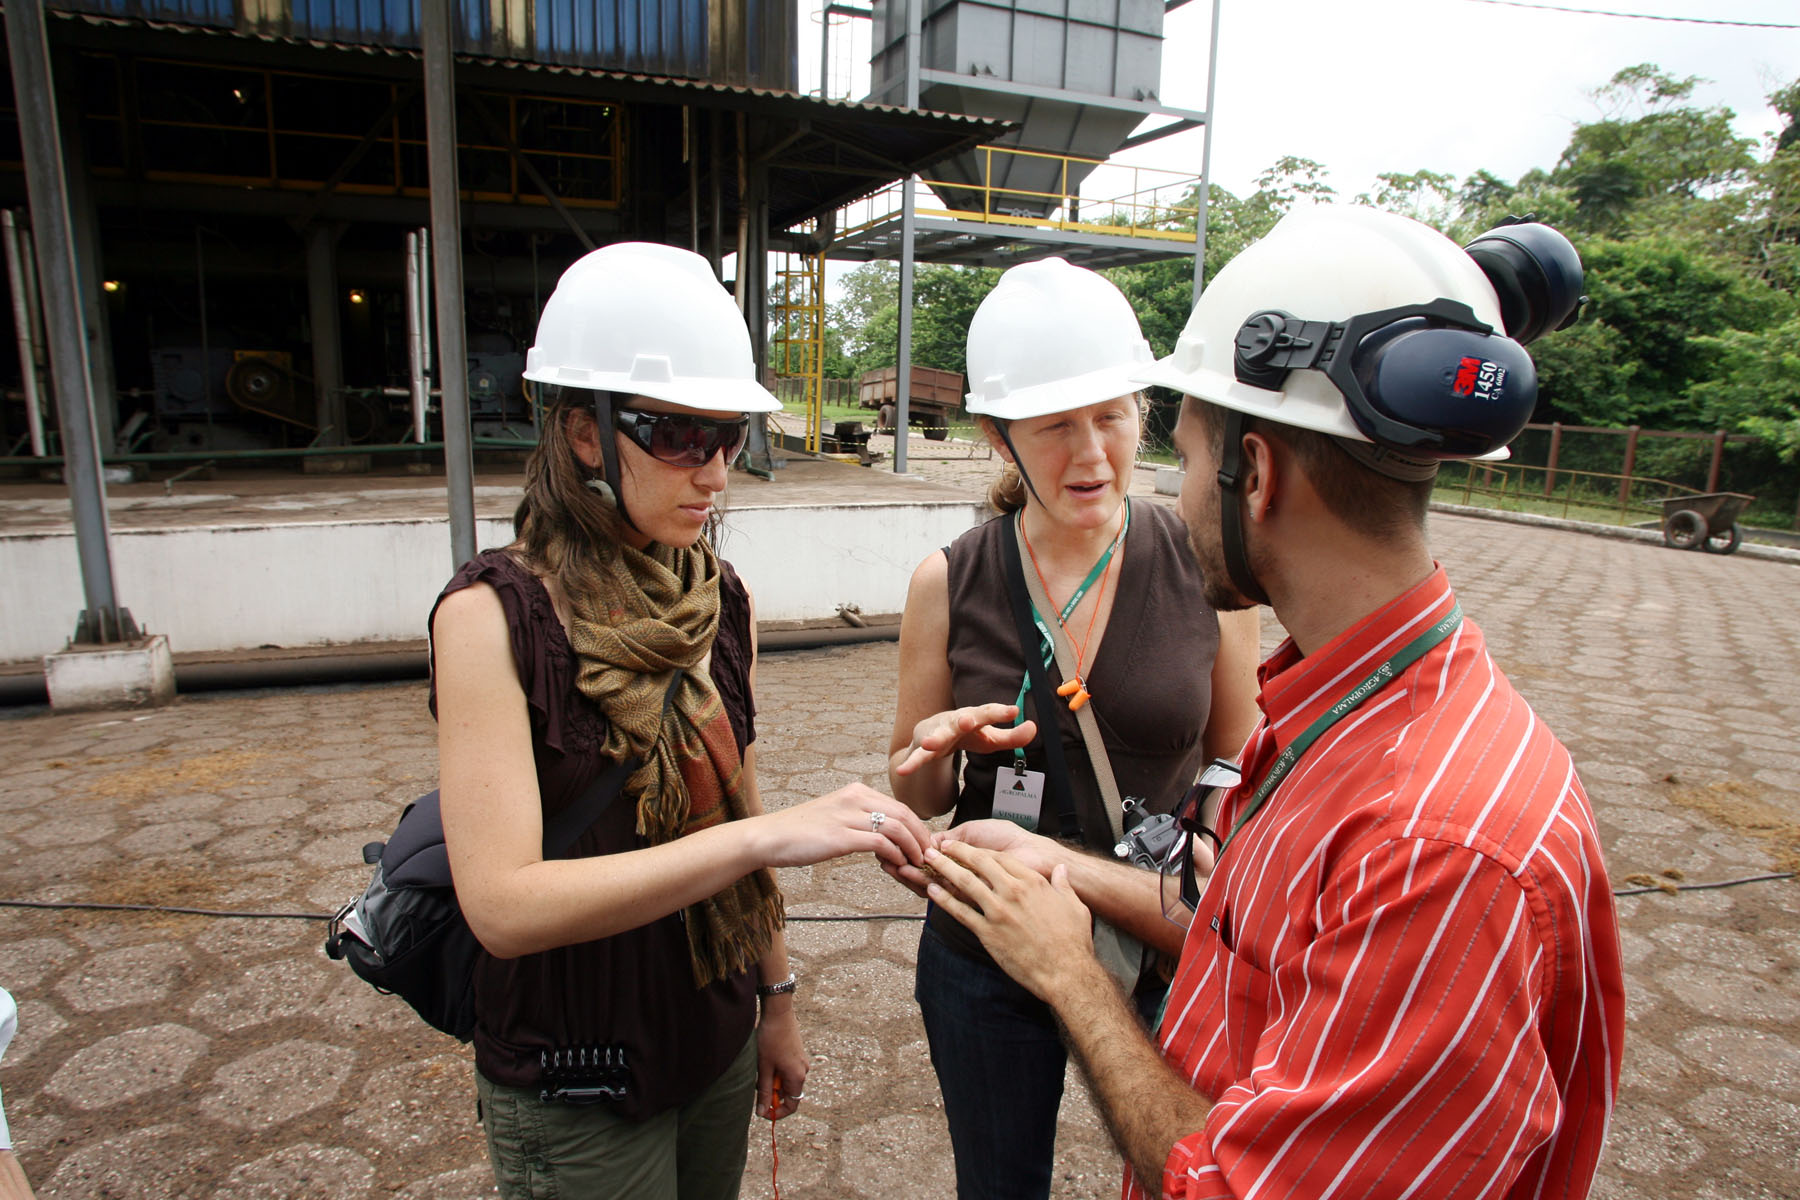 Andrea and Levana in front of the on-site oil palm processing facility